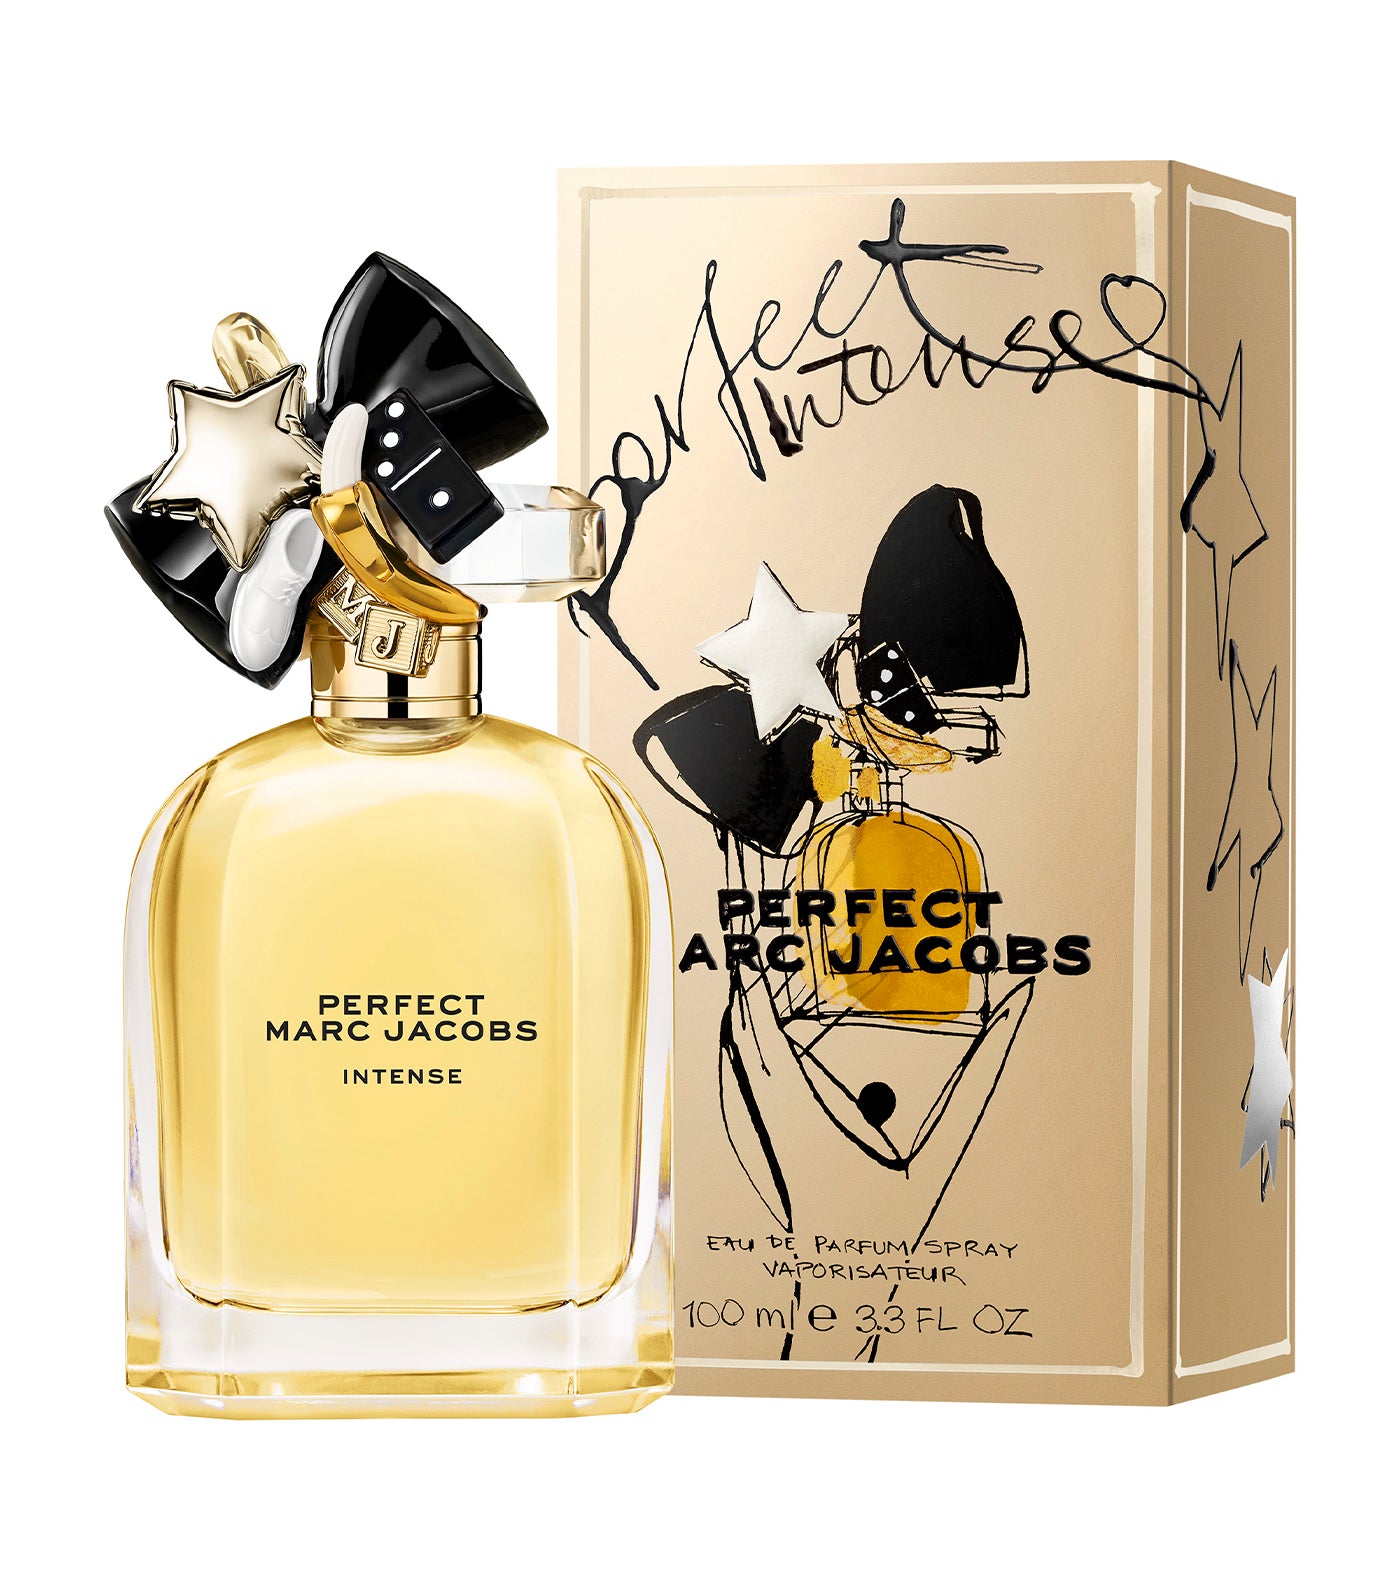 Buy Perfect Scents Inspired by Marc Jacobs's Daisy - Fragrance for Women -  2.5 Fluid Ounces Online at Low Prices in India - Amazon.in